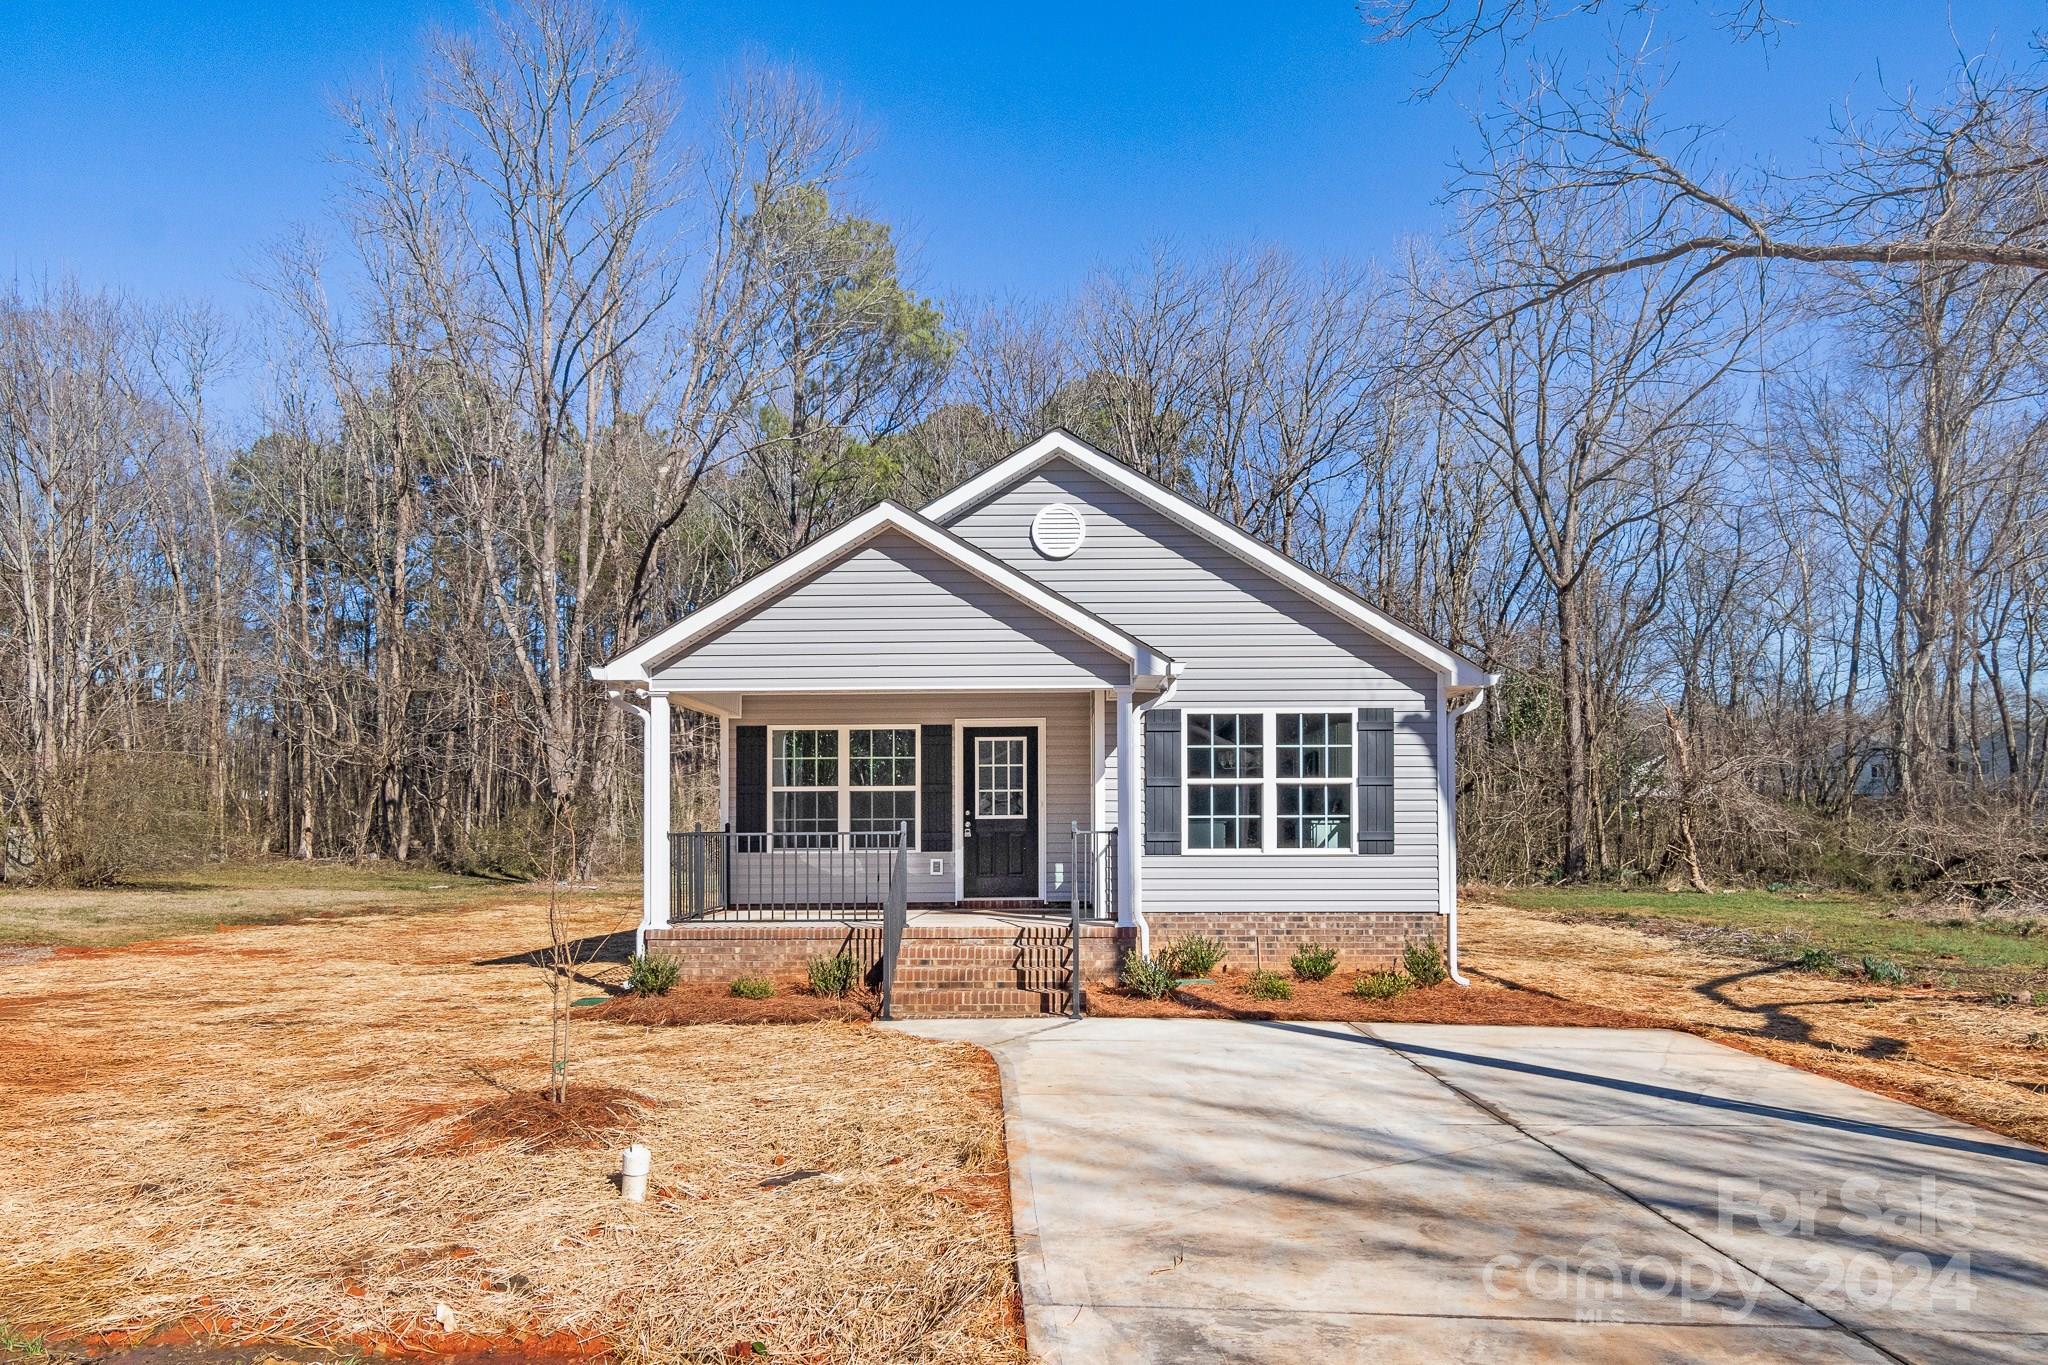 Photo one of 259 Lucky Ln Rock Hill SC 29730 | MLS 4130227